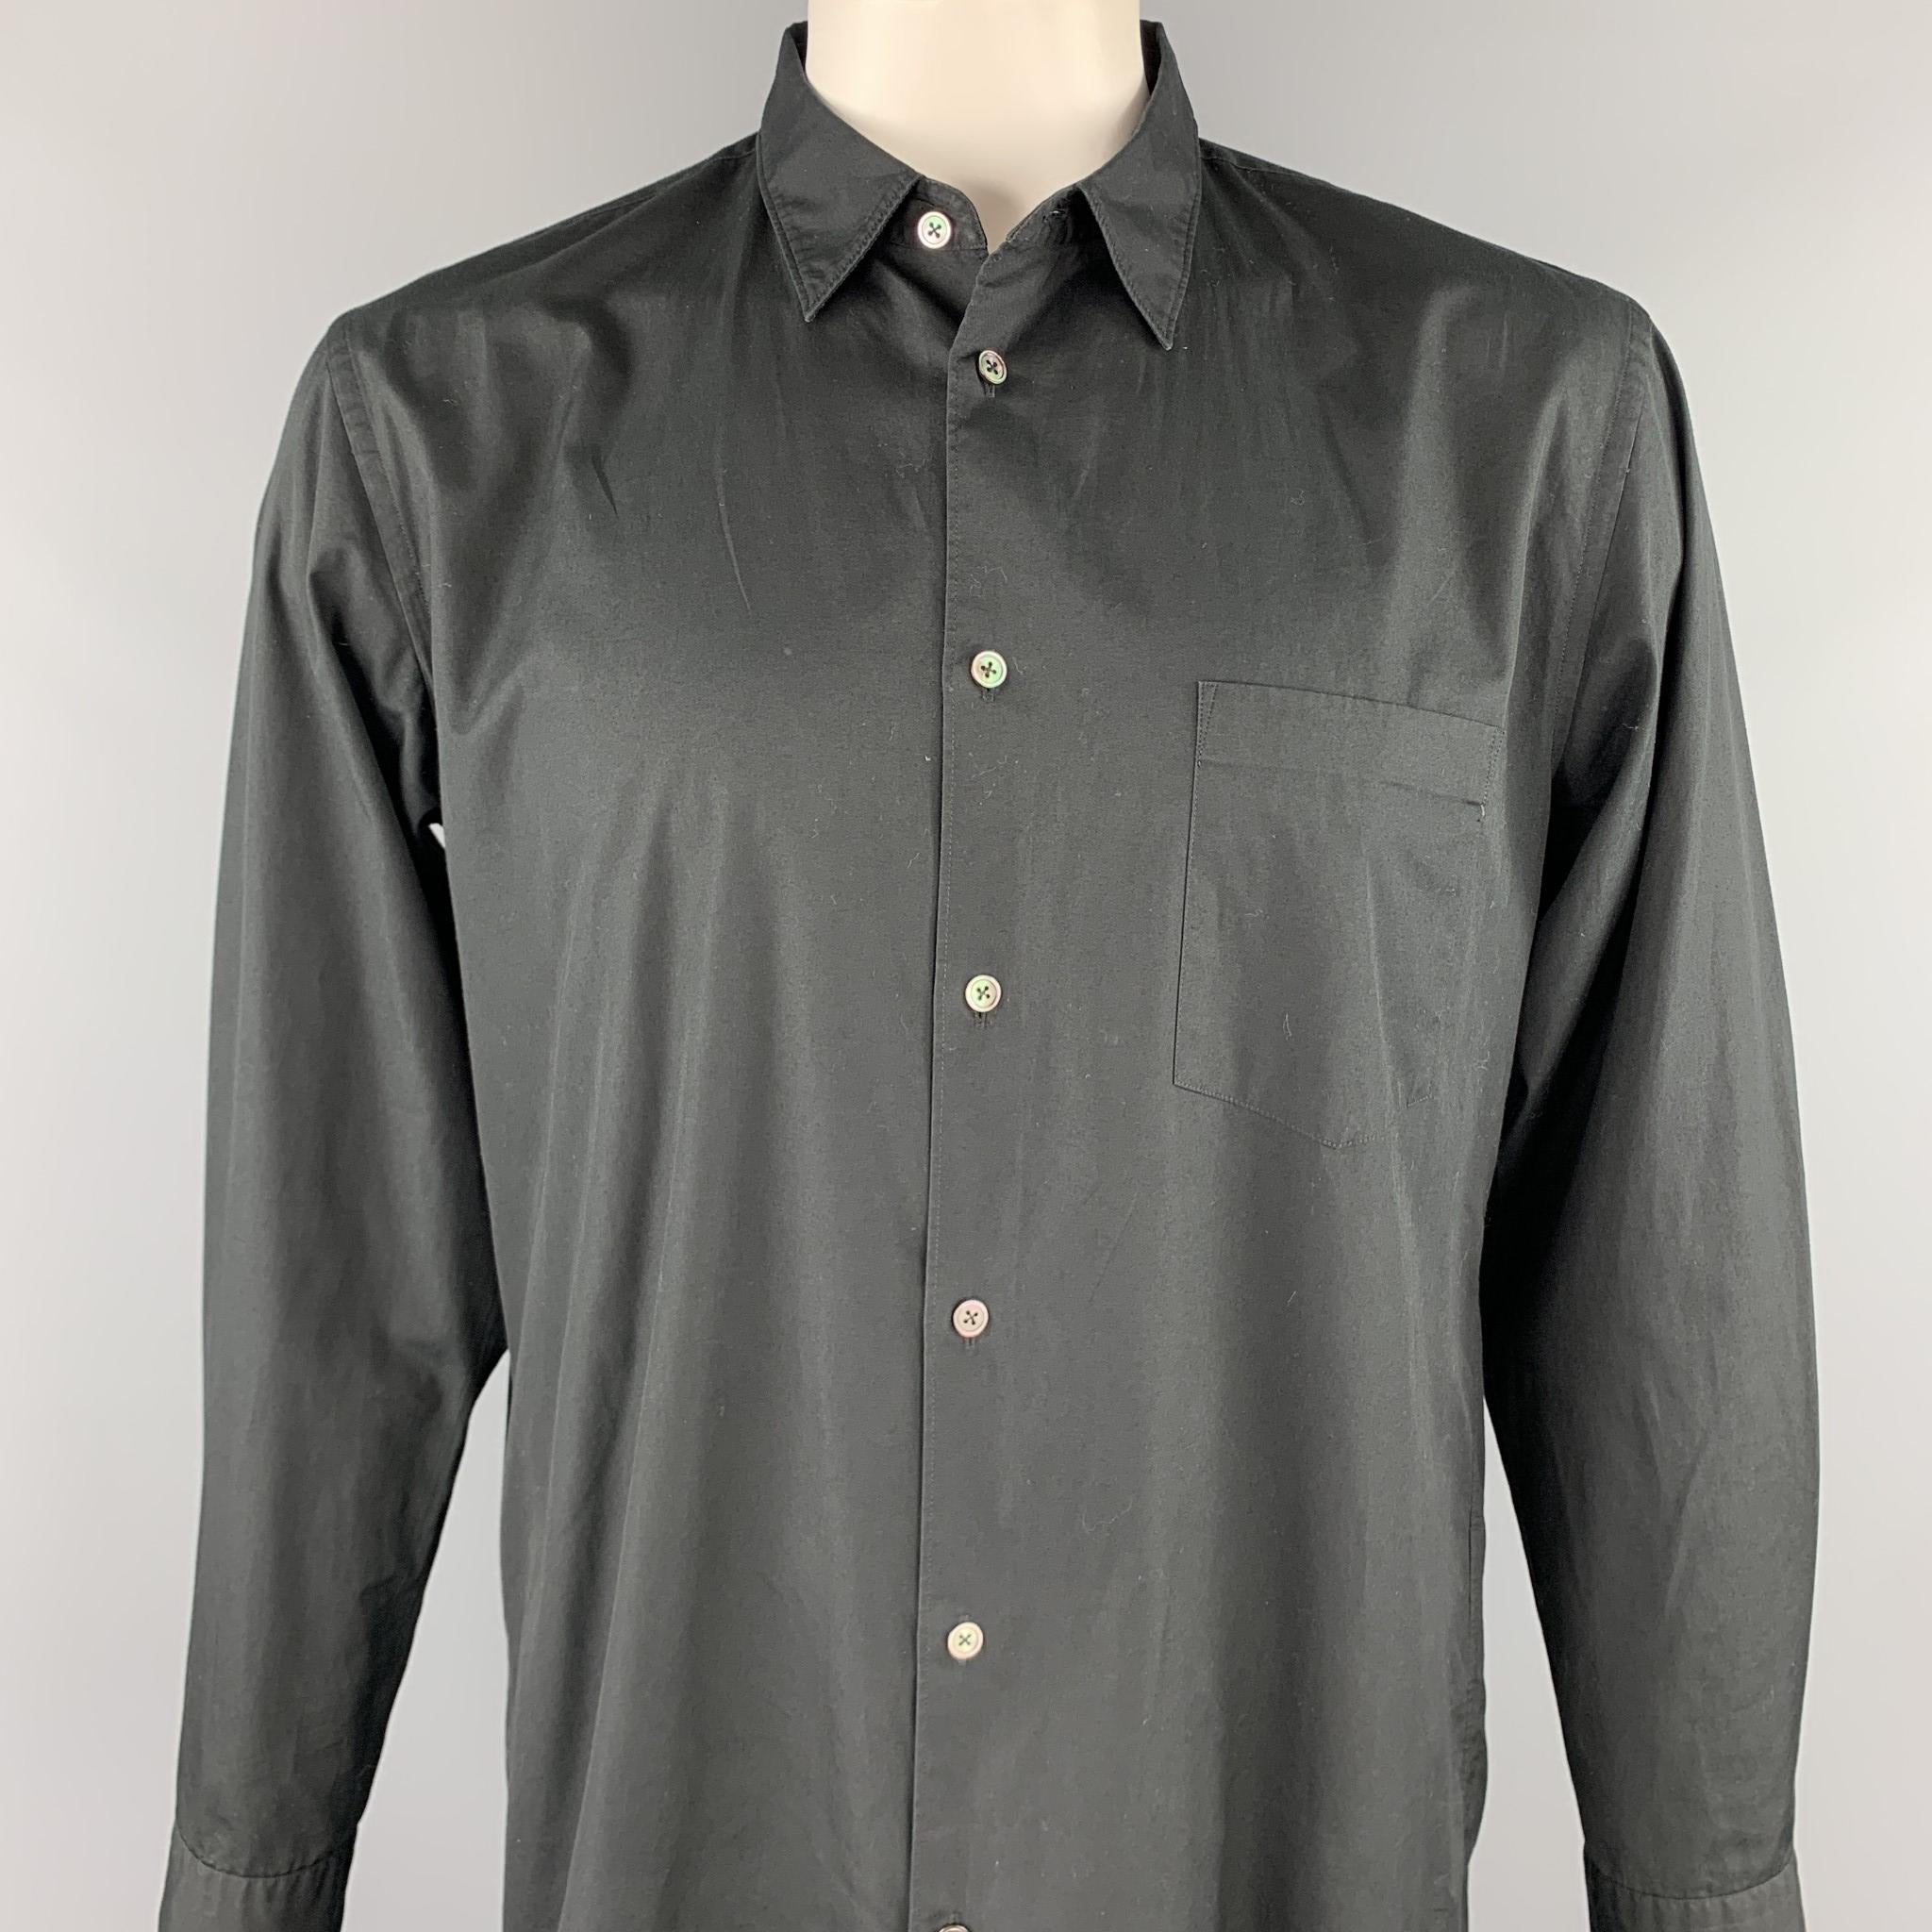 COMME des GARCONS HOMME PLUS long sleeve shirt comes in a black cotton featuring a long button up style, front patch pocket. Made in Japan.

Excellent Pre-Owned Condition.
Marked: L

Measurements:

Shoulder: 18.5 in. 
Chest: 44 in. 
Sleeve: 25.5 in.